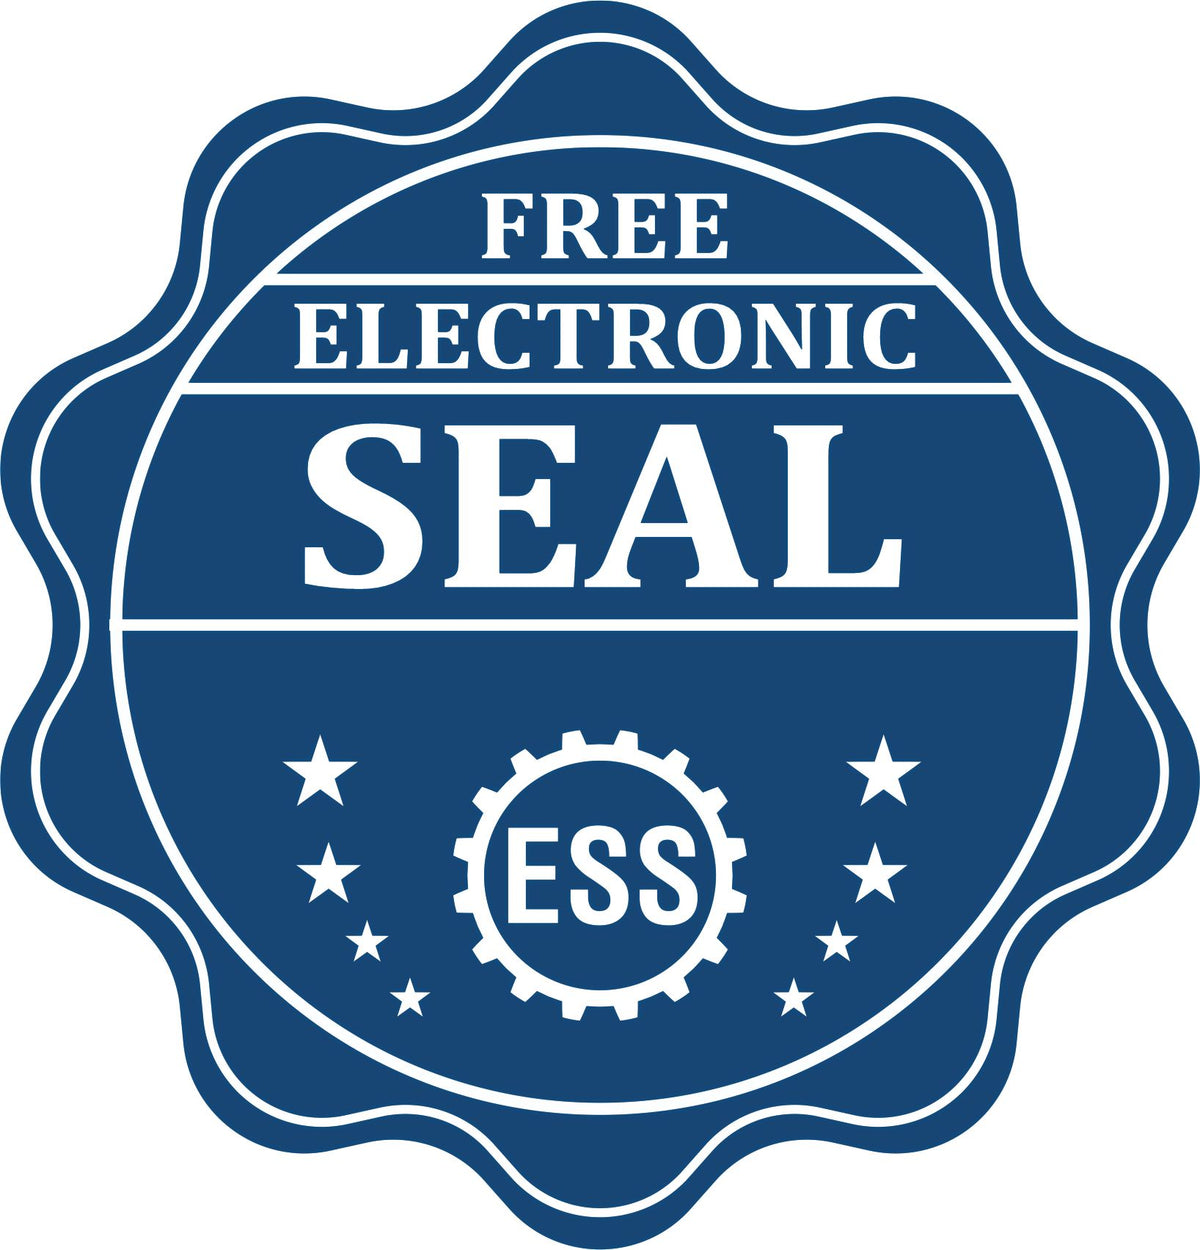 A badge showing a free electronic seal for the Super Slim South Carolina Notary Public Stamp with stars and the ESS gear on the emblem.